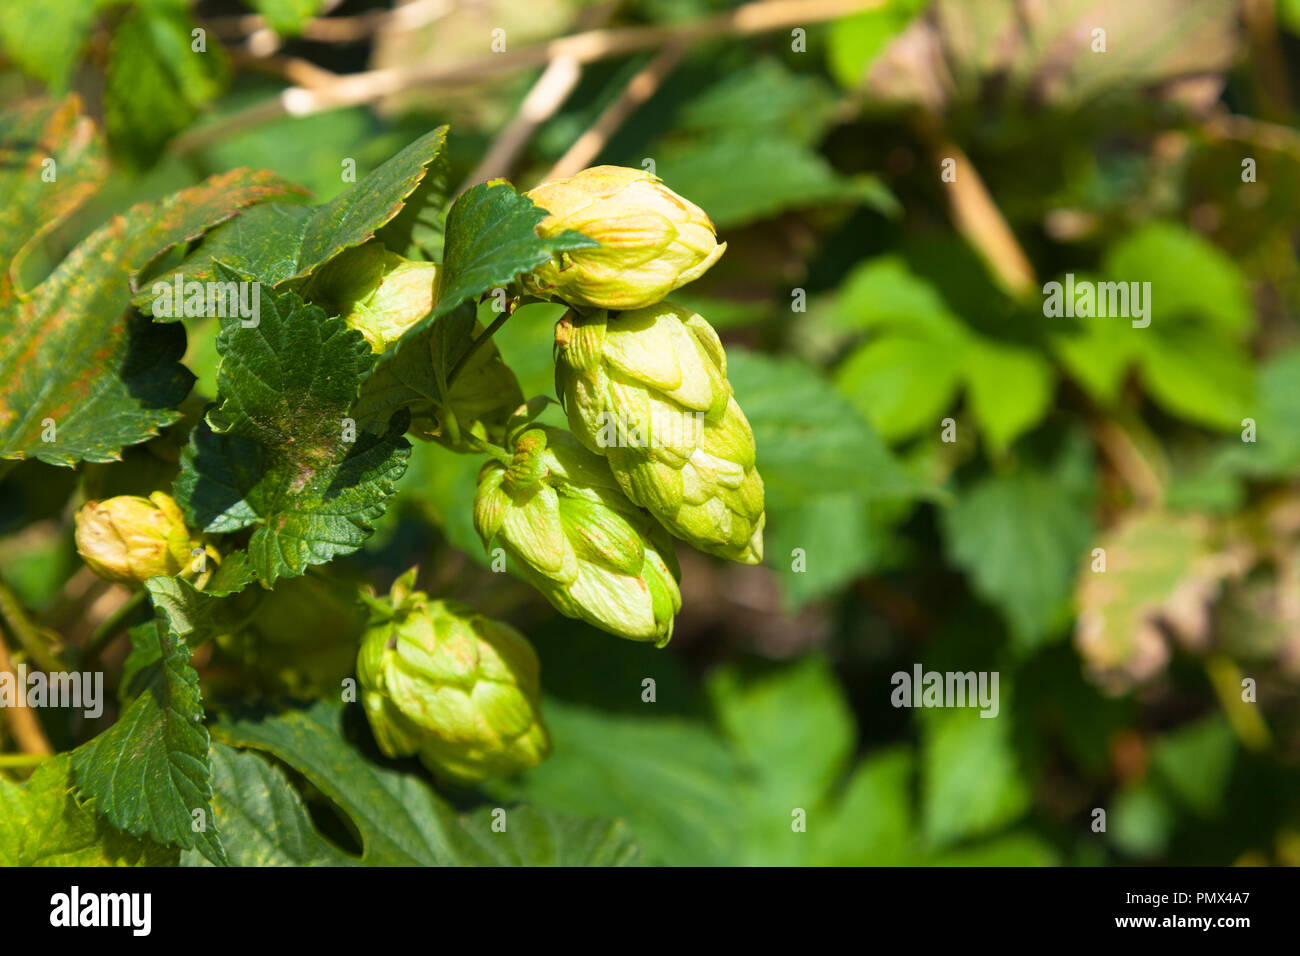 Hop plant (Humulus lupulus), Kent, UK, autumn.  Dried hop flowers provide bittering, flavouring and stability in beer, also used in herbal medicine. Stock Photo